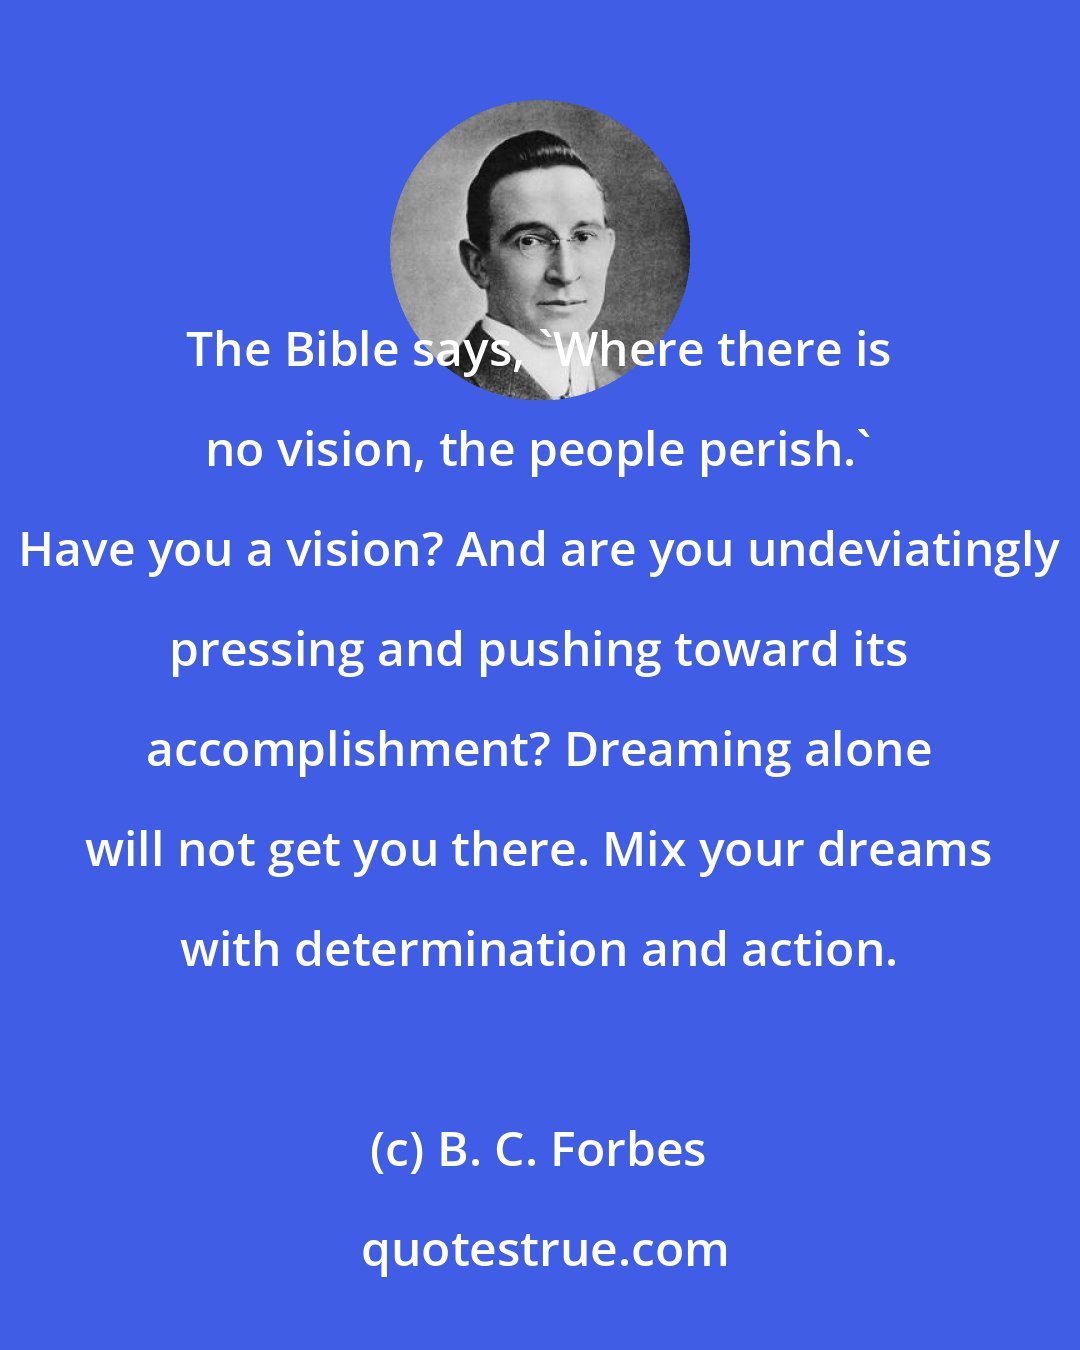 B. C. Forbes: The Bible says, 'Where there is no vision, the people perish.' Have you a vision? And are you undeviatingly pressing and pushing toward its accomplishment? Dreaming alone will not get you there. Mix your dreams with determination and action.